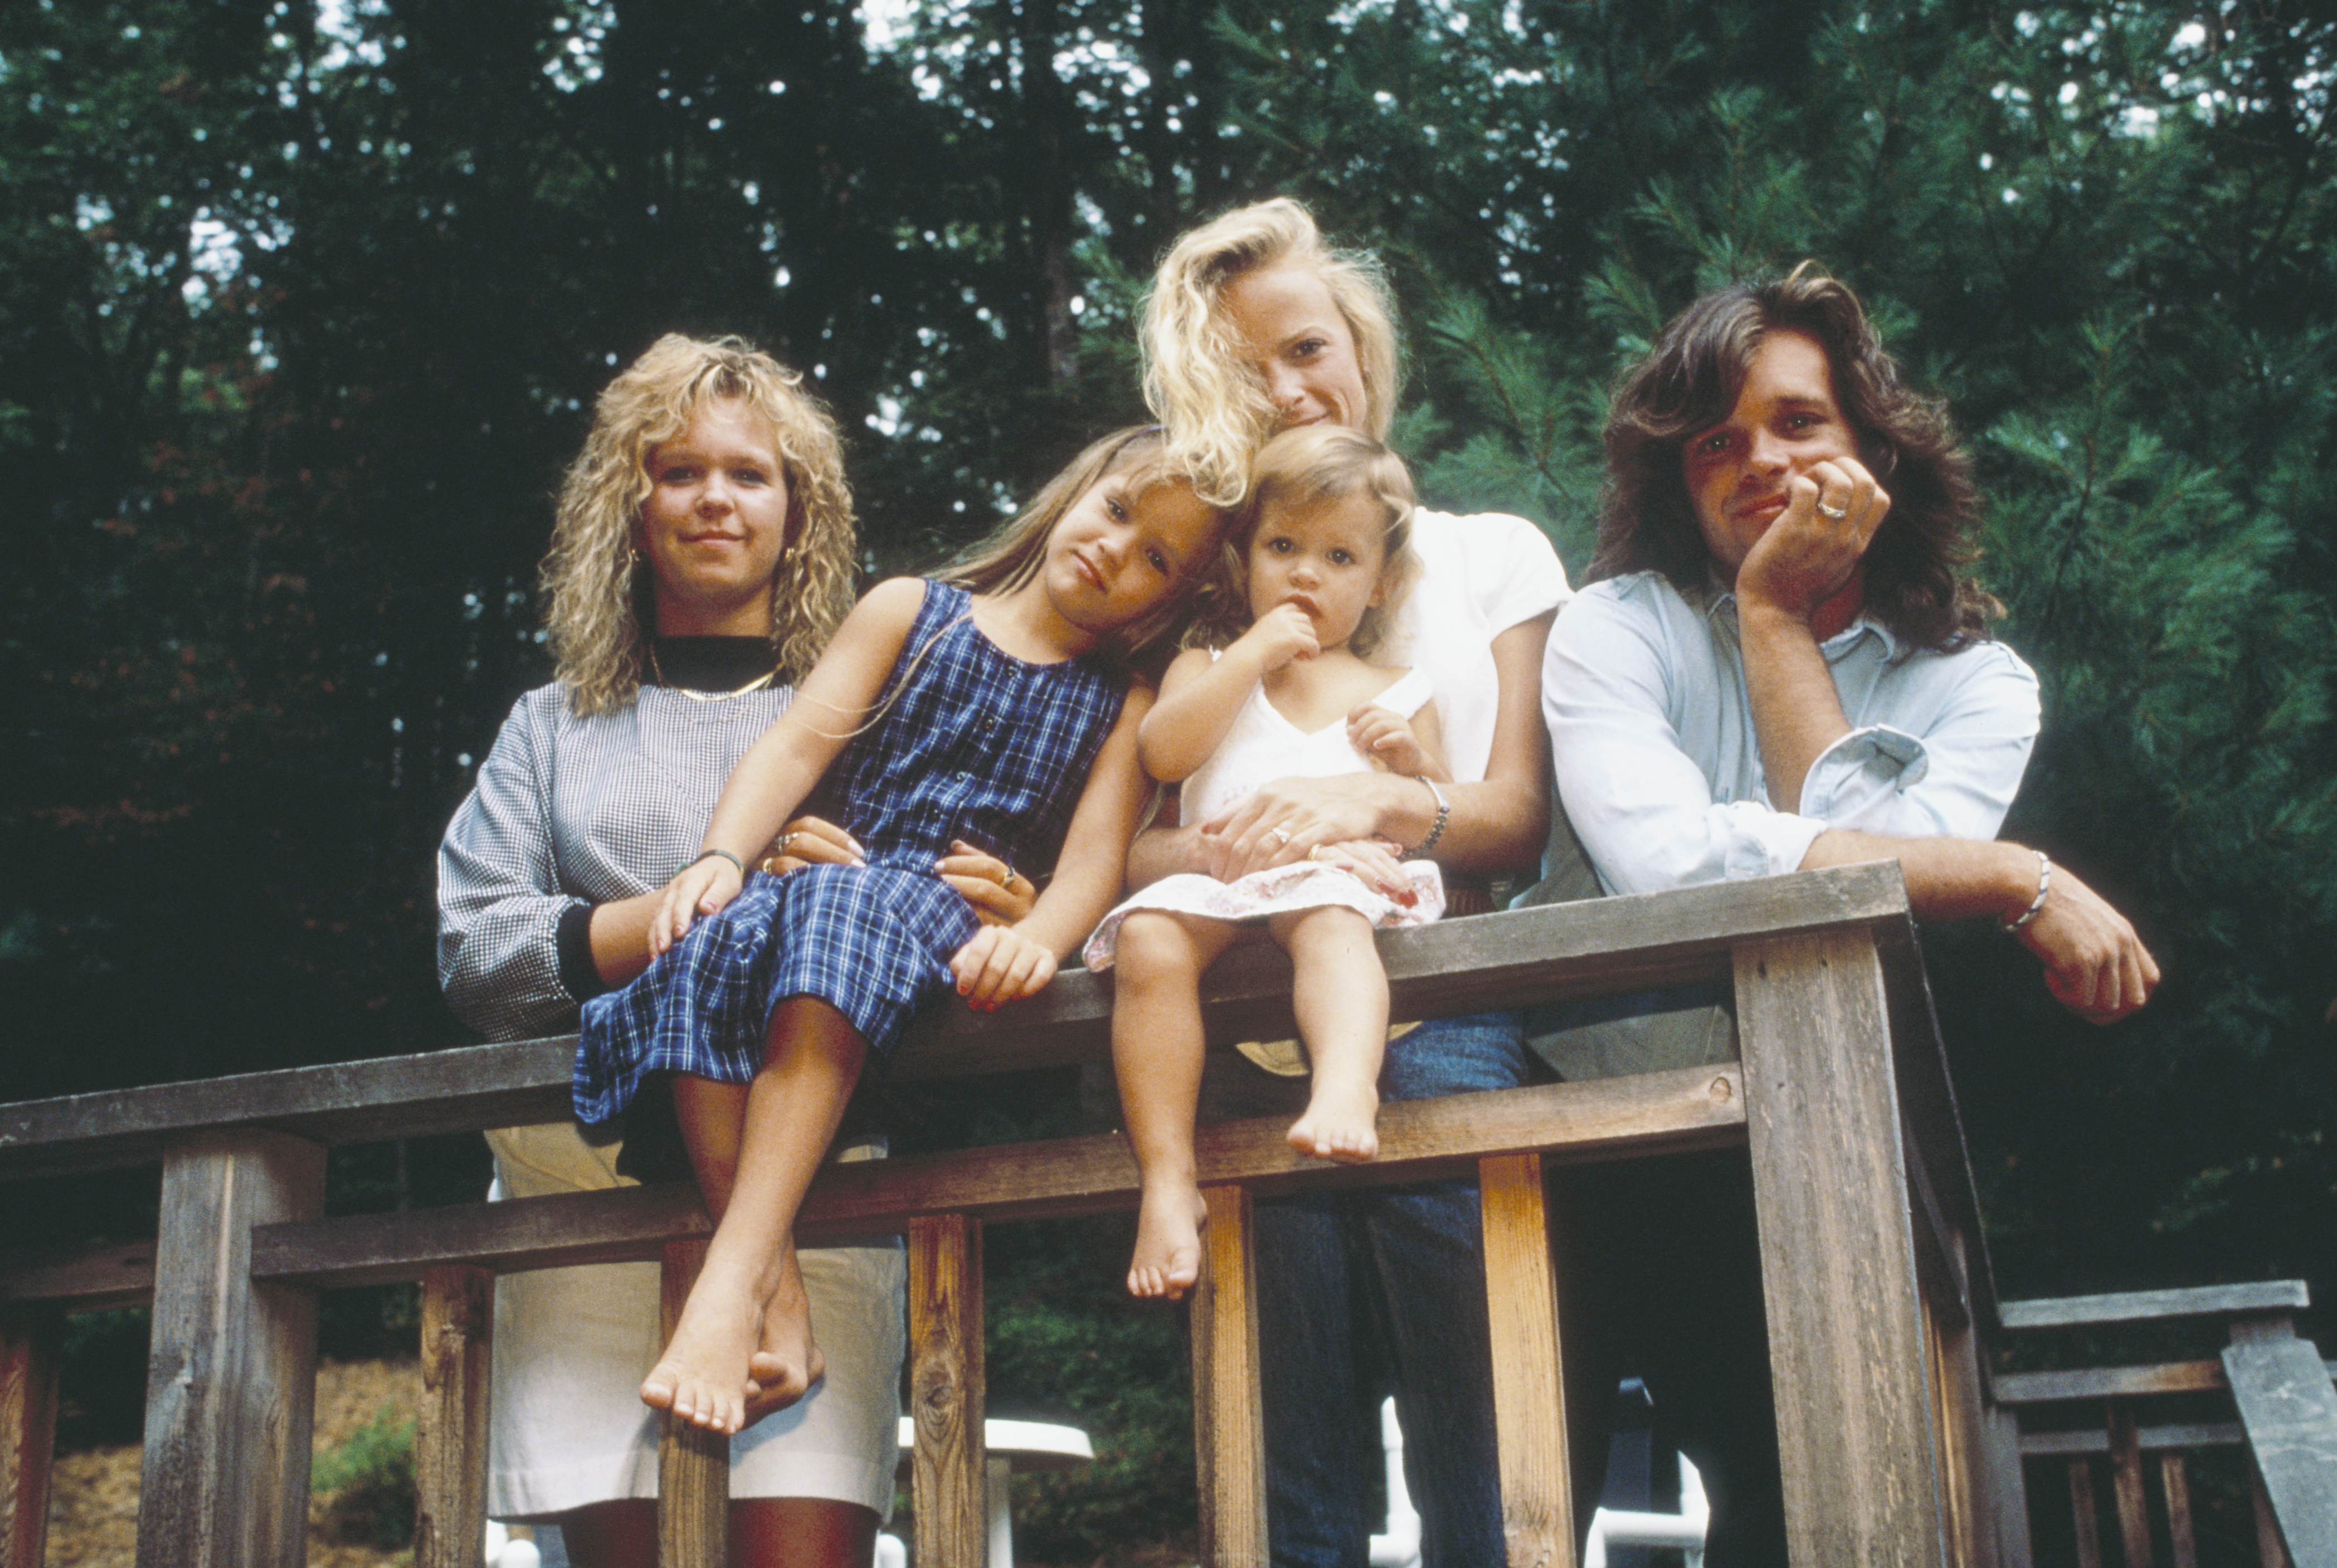 John Mellencamp poses with his daughters Michele, Teddi Jo, and Justice, and his wife, Victoria Mellencamp in 1987 | Source: Getty Images